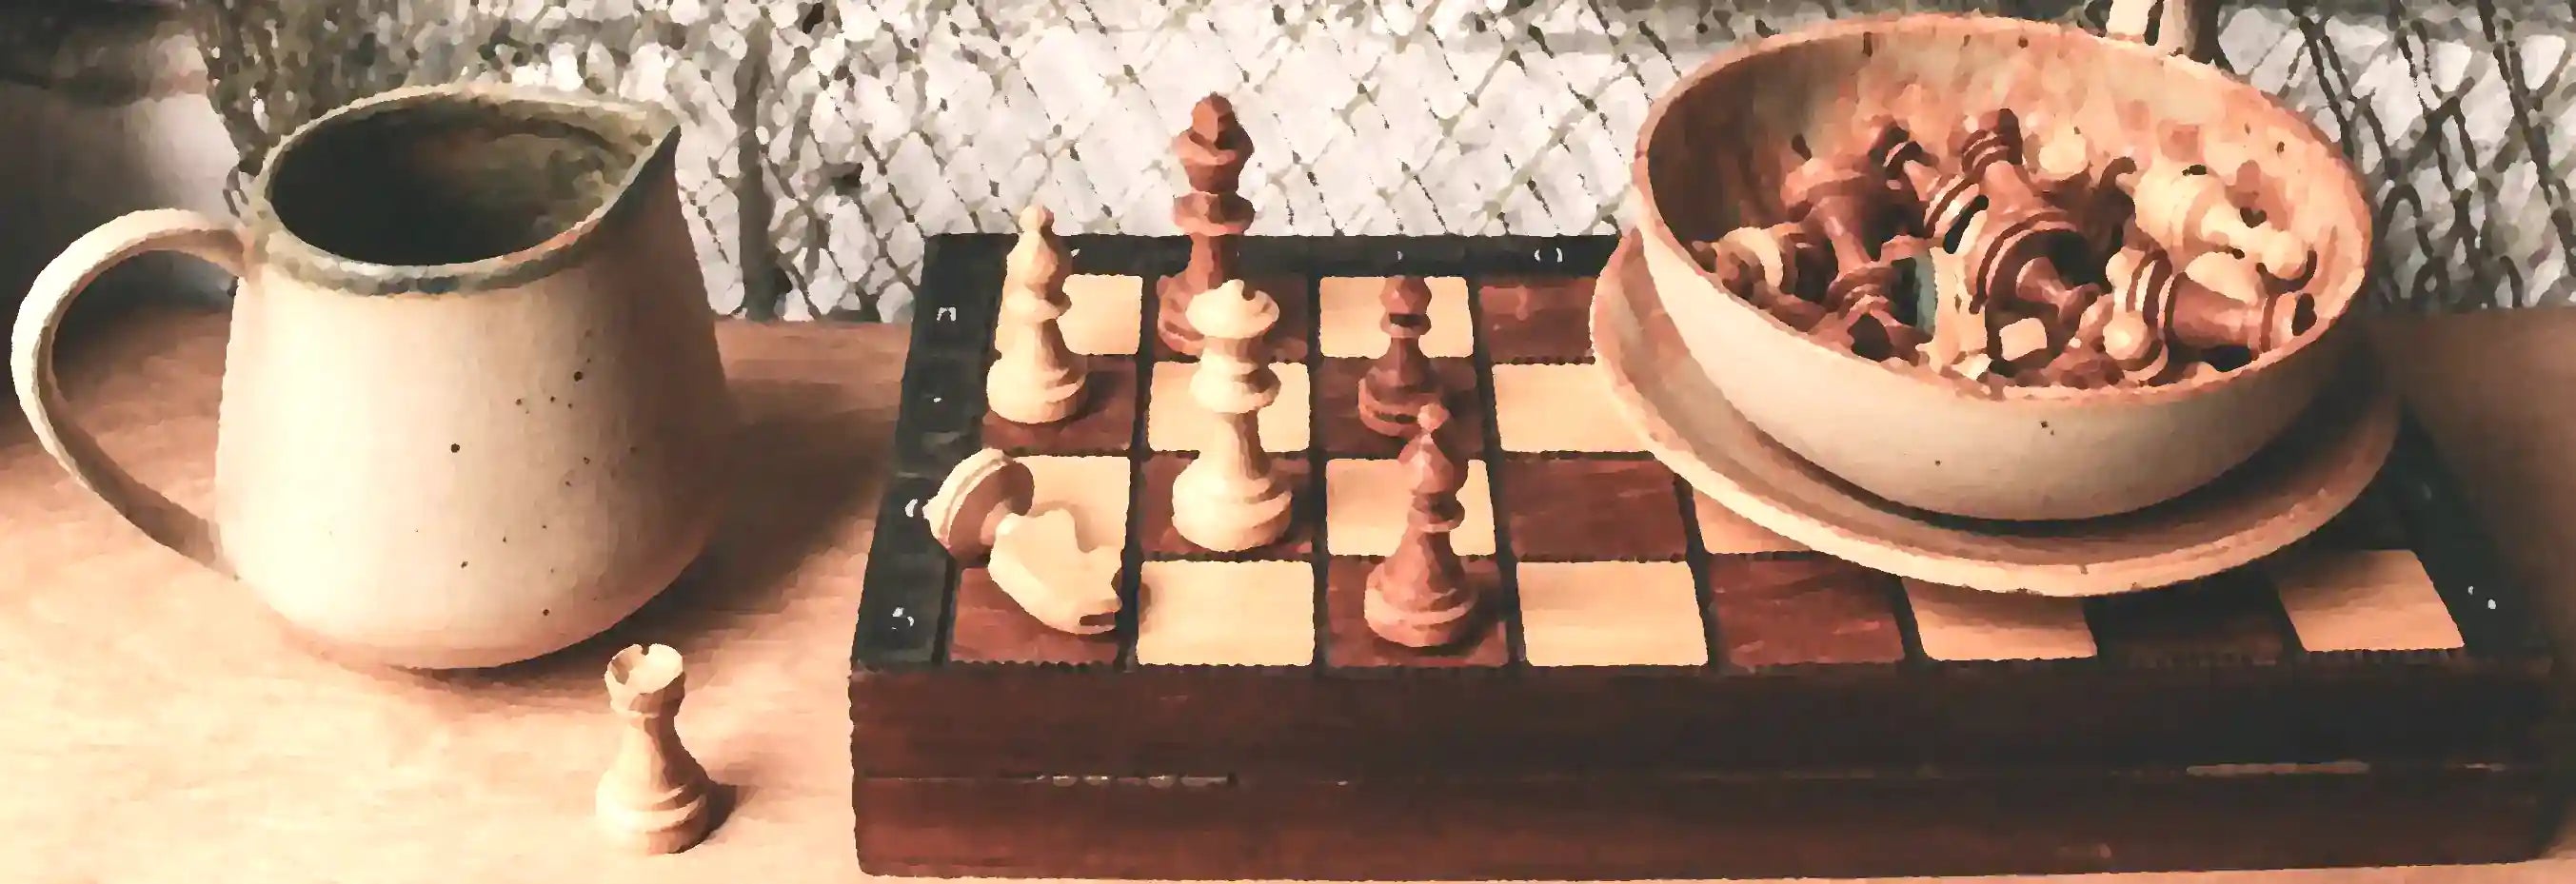 Chess pieces in a bowl and chessboard placed on a commode